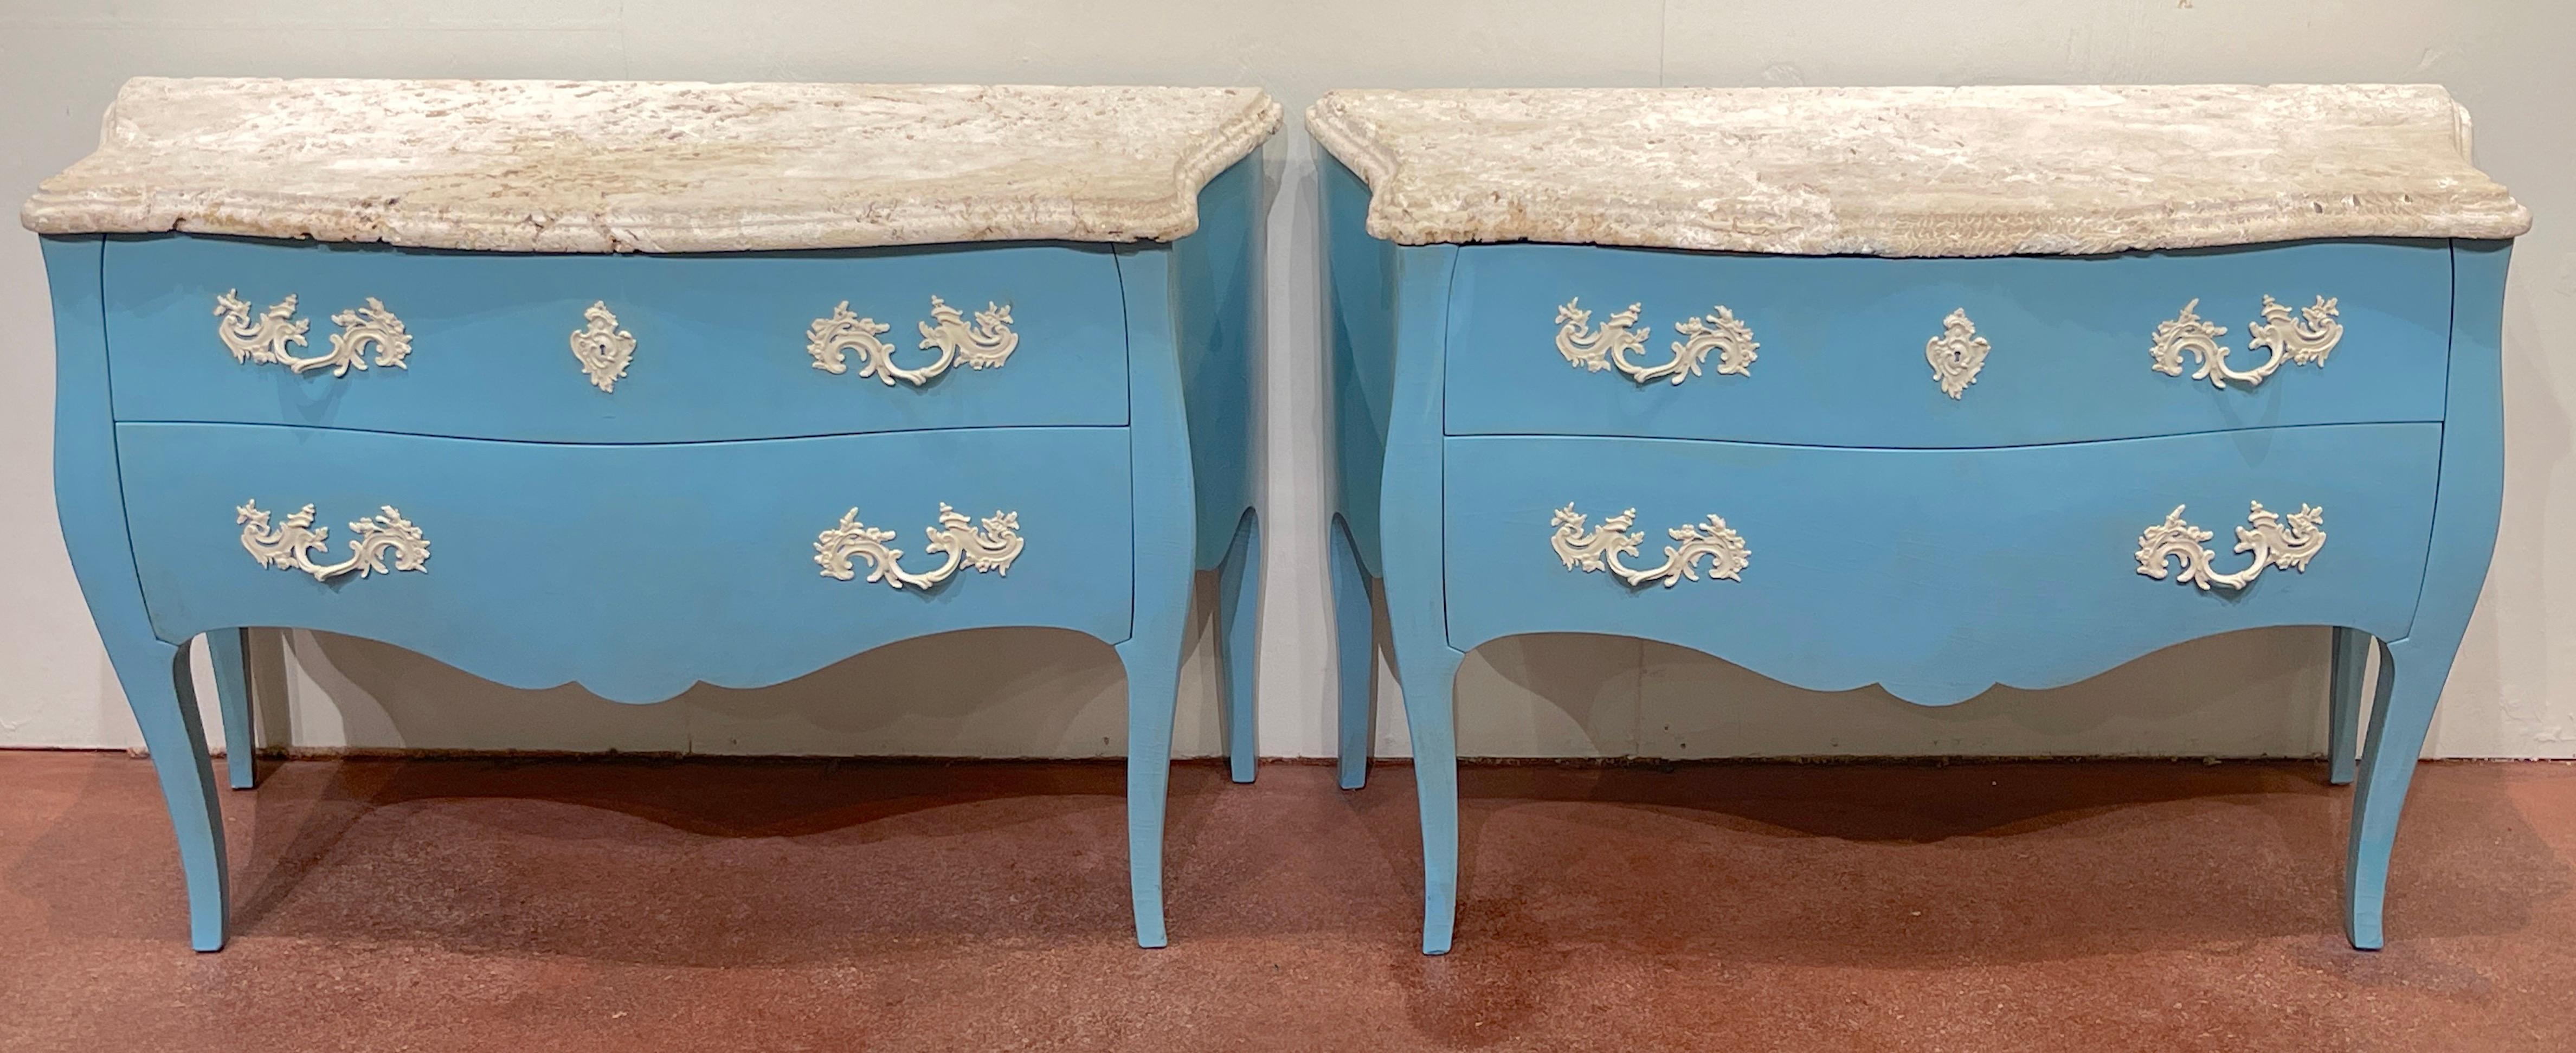 Pair of 'Palm Beach Blue' lacquered commodes with natural coquina stone.
European, purchased in France in 1980s.

A stunning pair of Neoclassical styled bombe commodes. Each one consisting of two parts, a extraordinary carved coquina Sstone